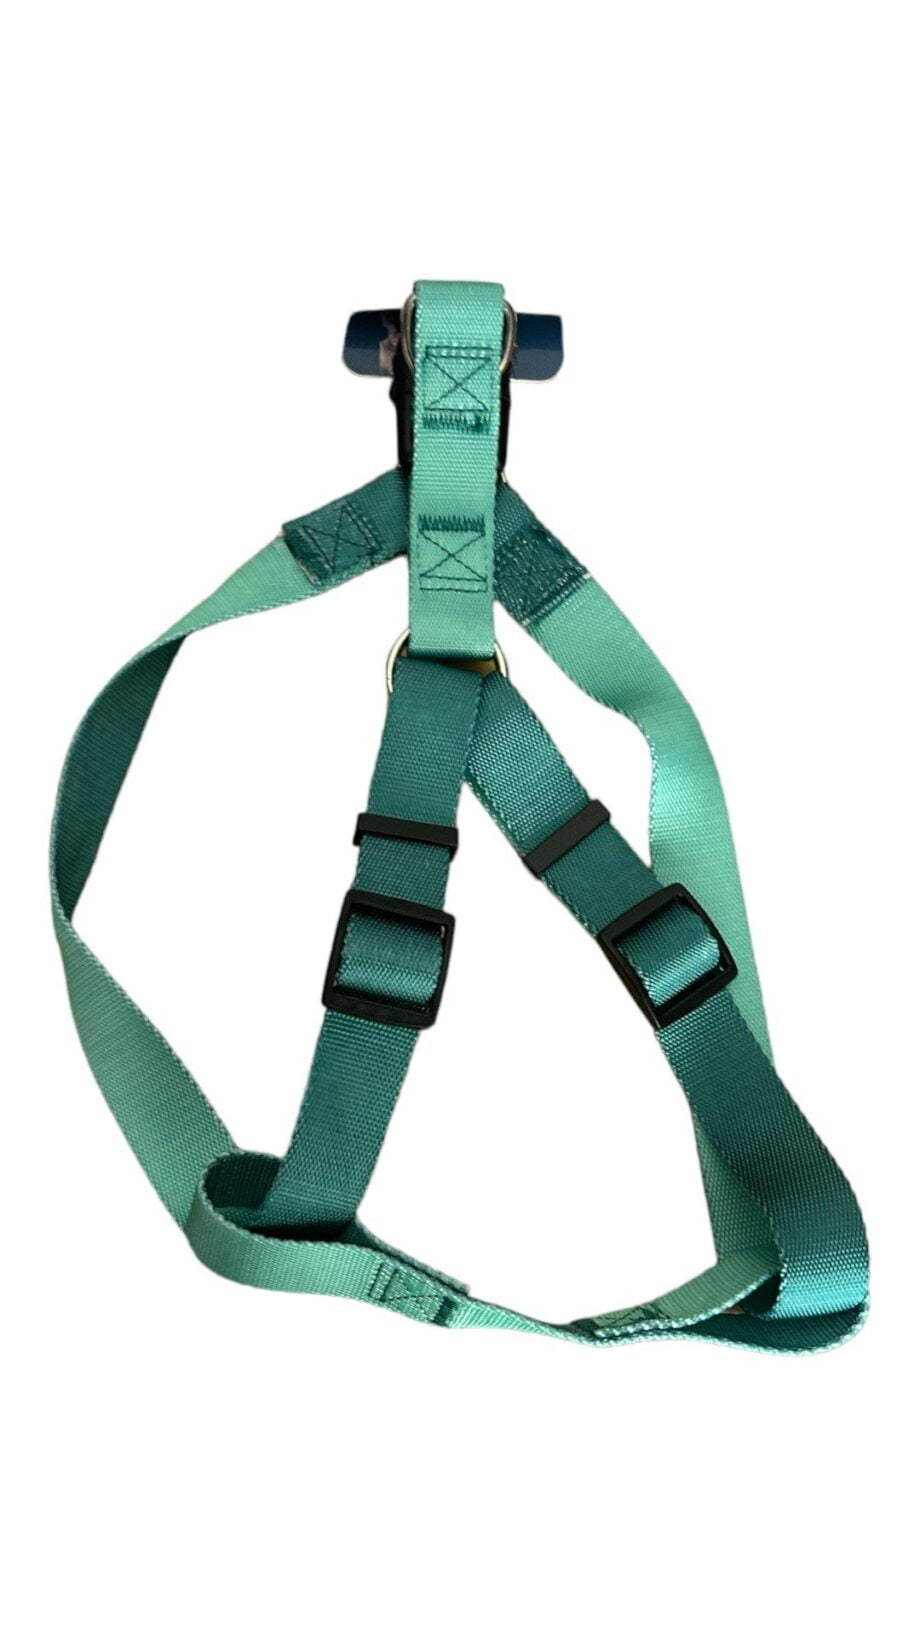 Two- Tone Adjustable Pet Harness